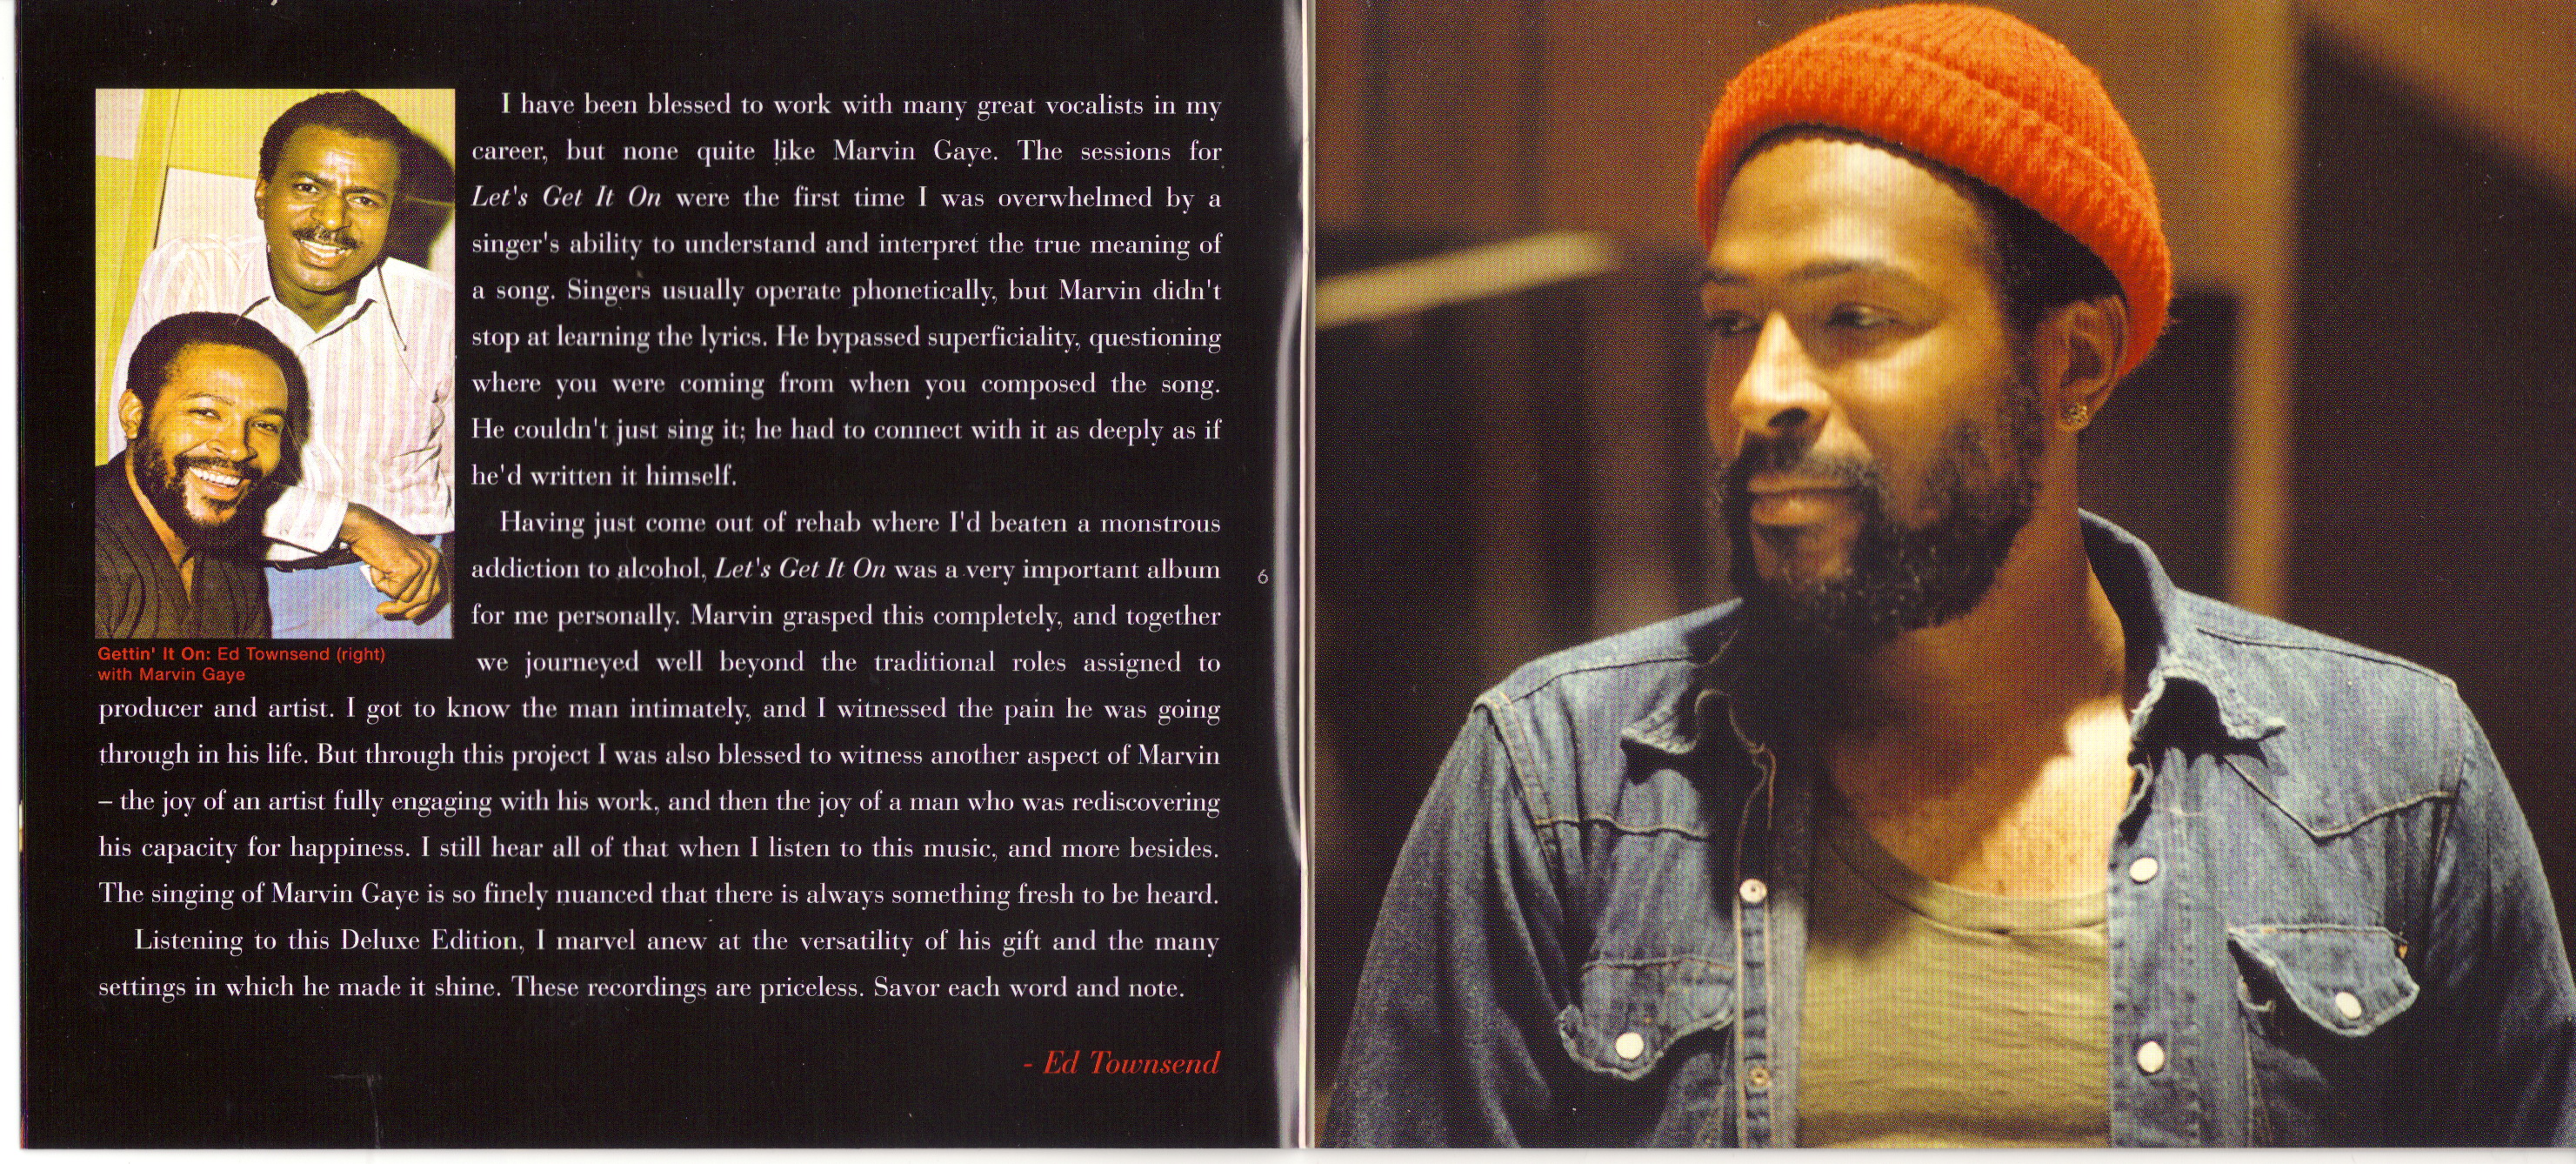 Marvin Gaye Lets Get It On (Deluxe Edition) : Booklet 3.